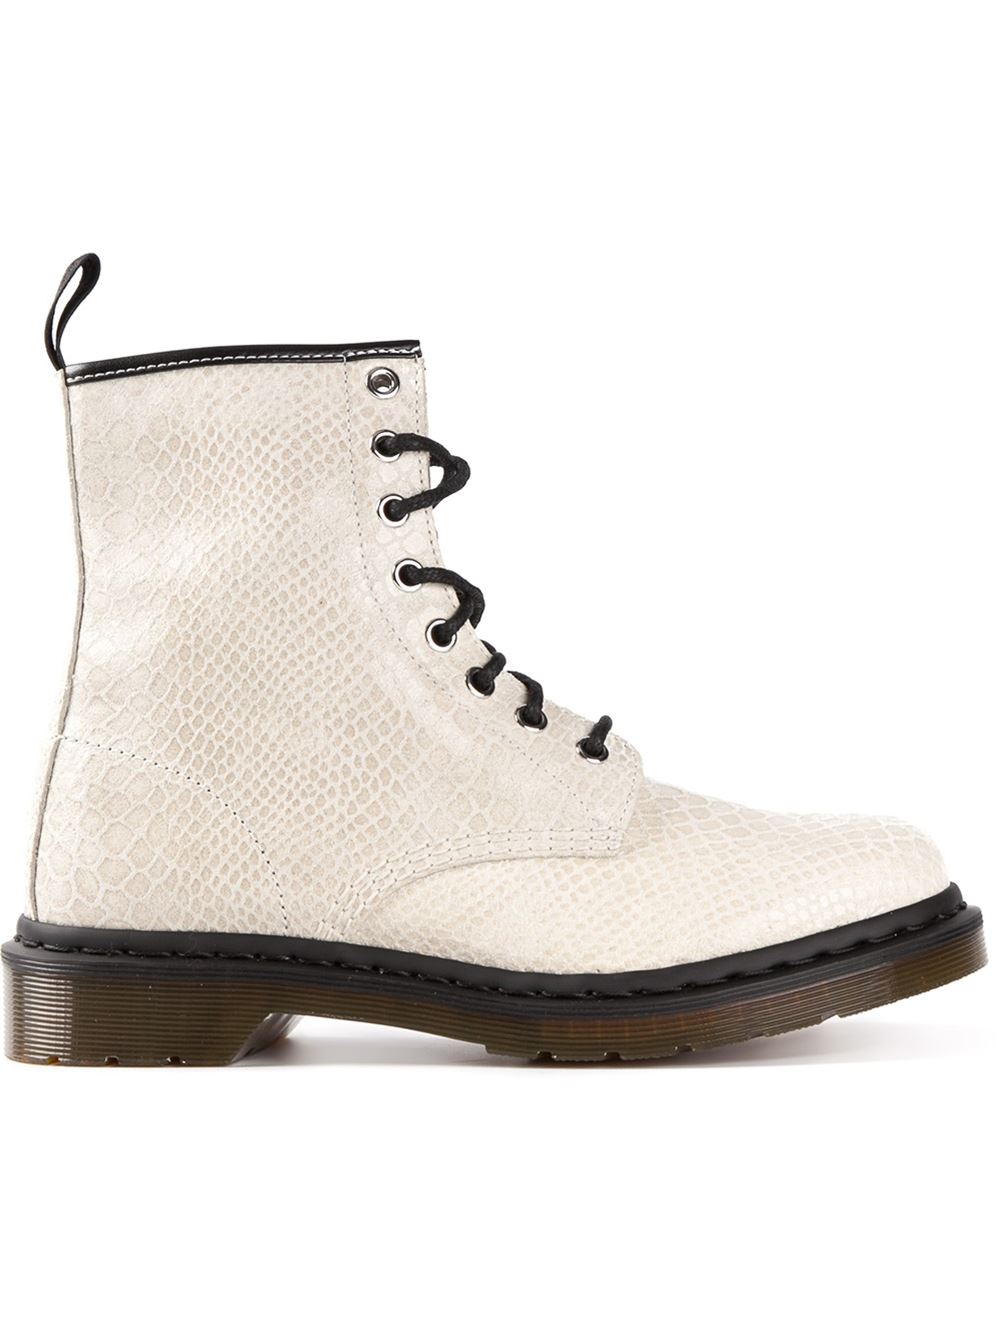 Dr. Martens '1460' Snakeskin Effect Boots in White | Lyst